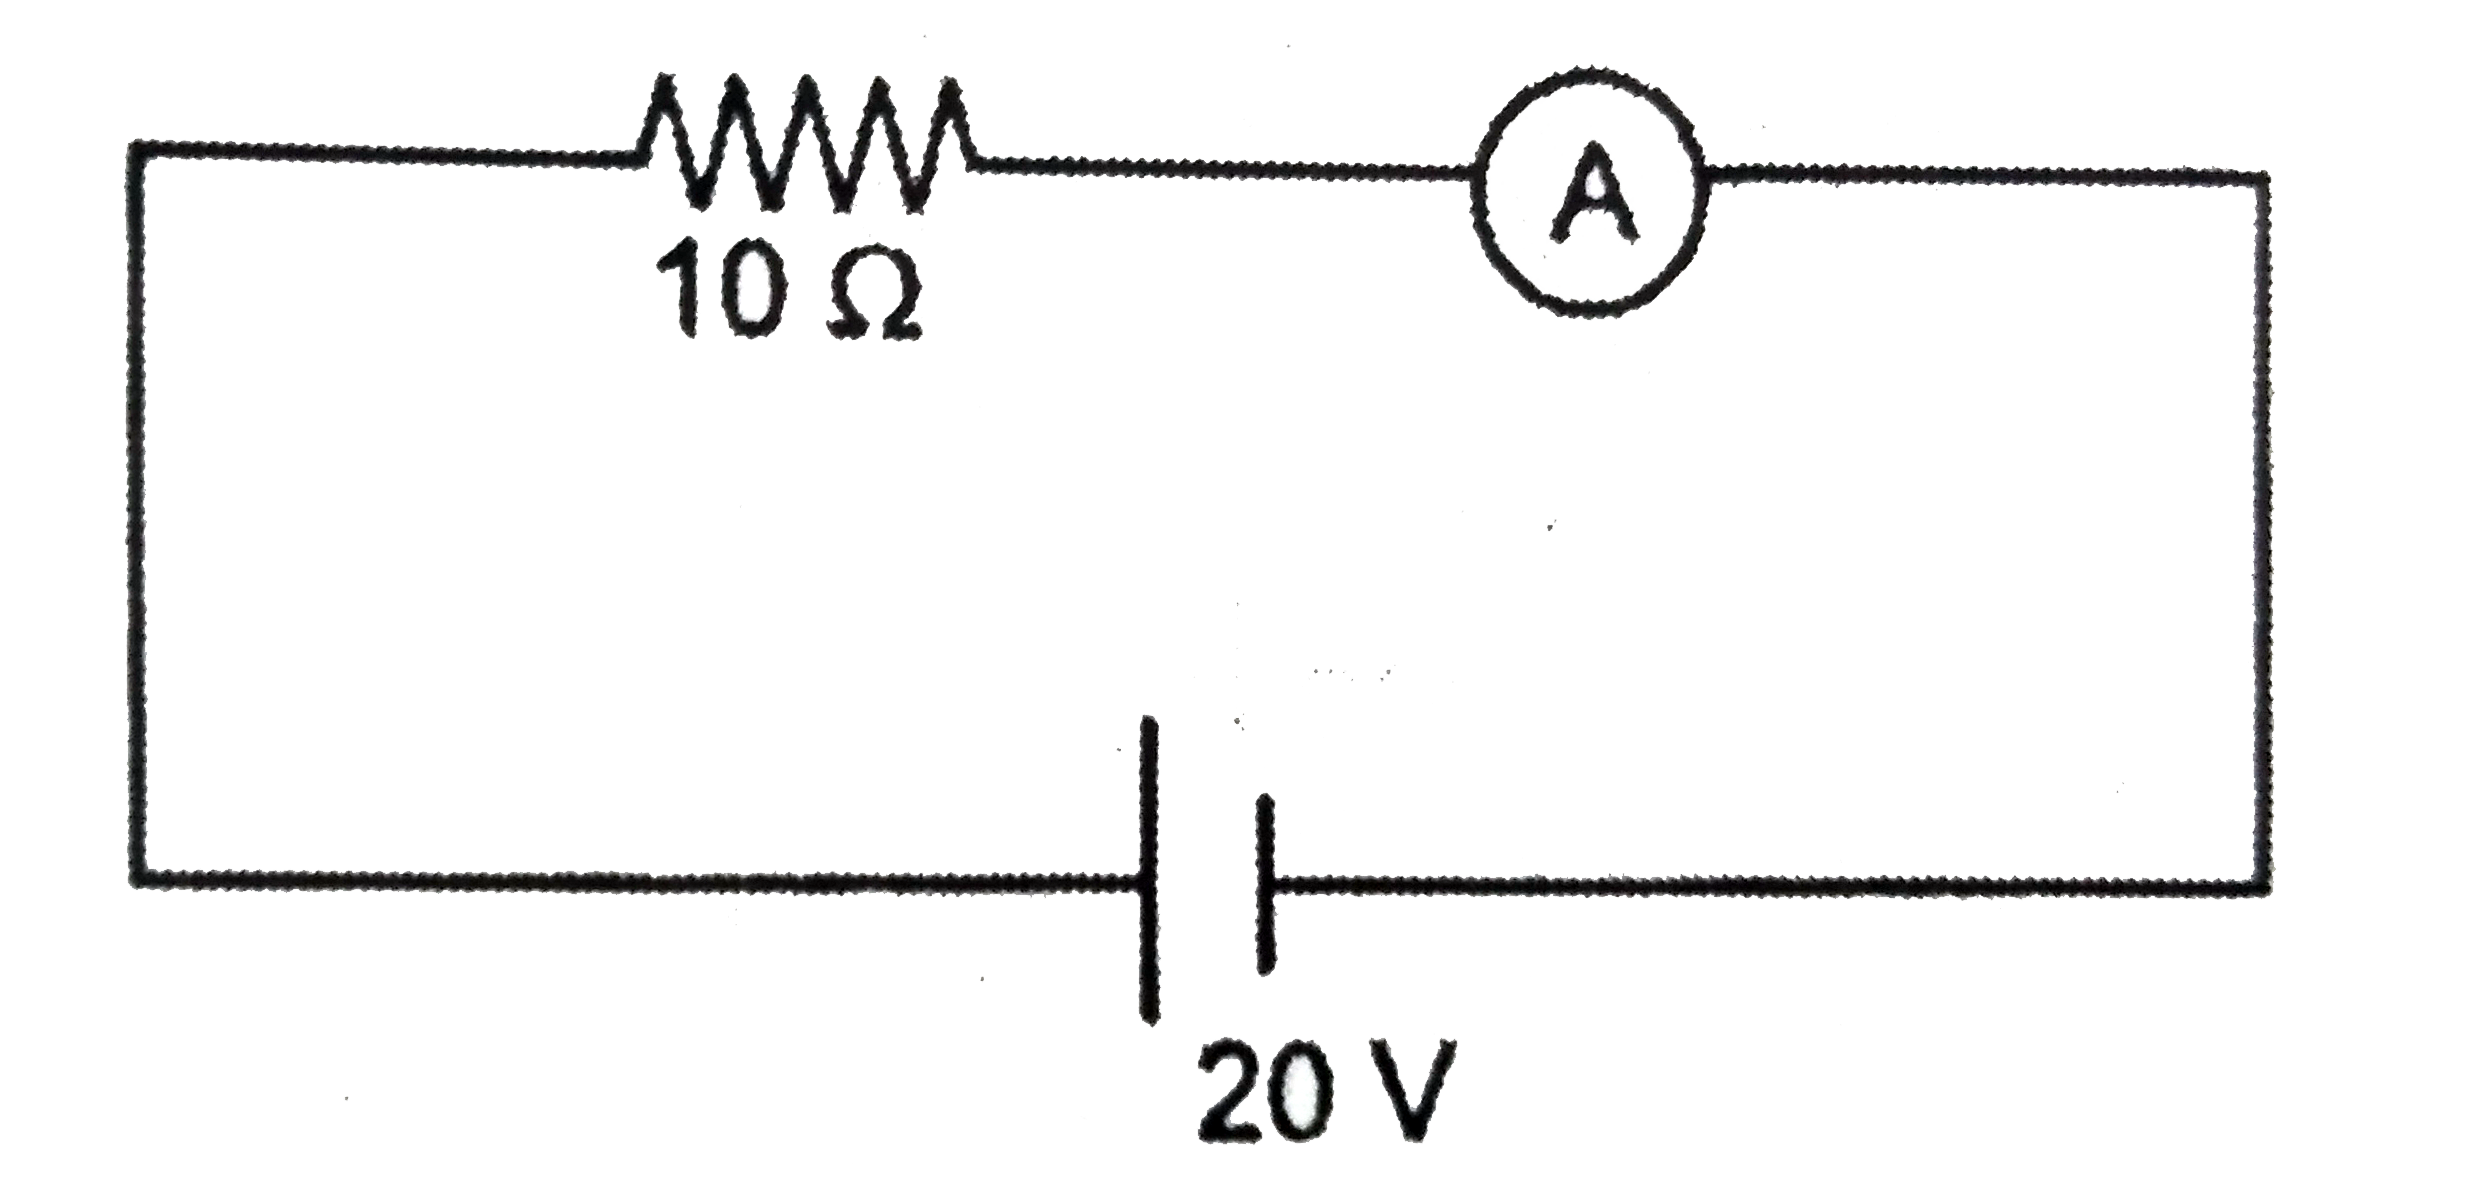 The ammeter shown in the figure consists of a 480Omega coil conneted in parallel to 20 Omega shunt. Find the reading of the ammeter.